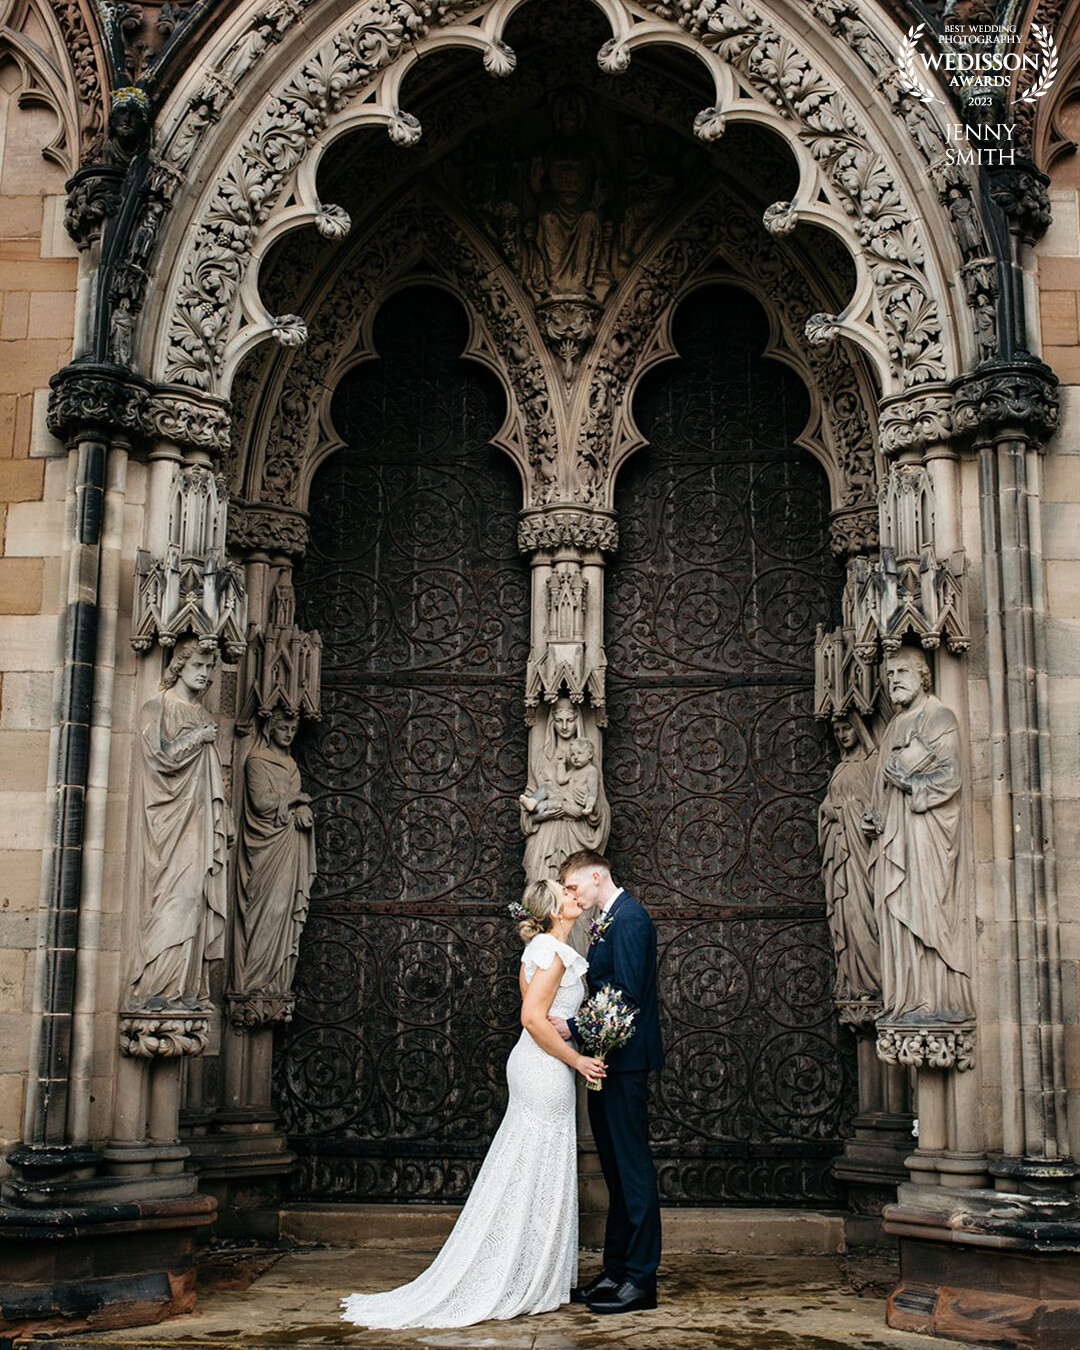 We shot this dramatic portrait of Keeley & Rory on their wedding day in Lichfield - we chose this doorway not only for its magnificent intricate details but also to give the couple shelter from the rain. A kind passer by held an umbrella over my head whilst I shot.